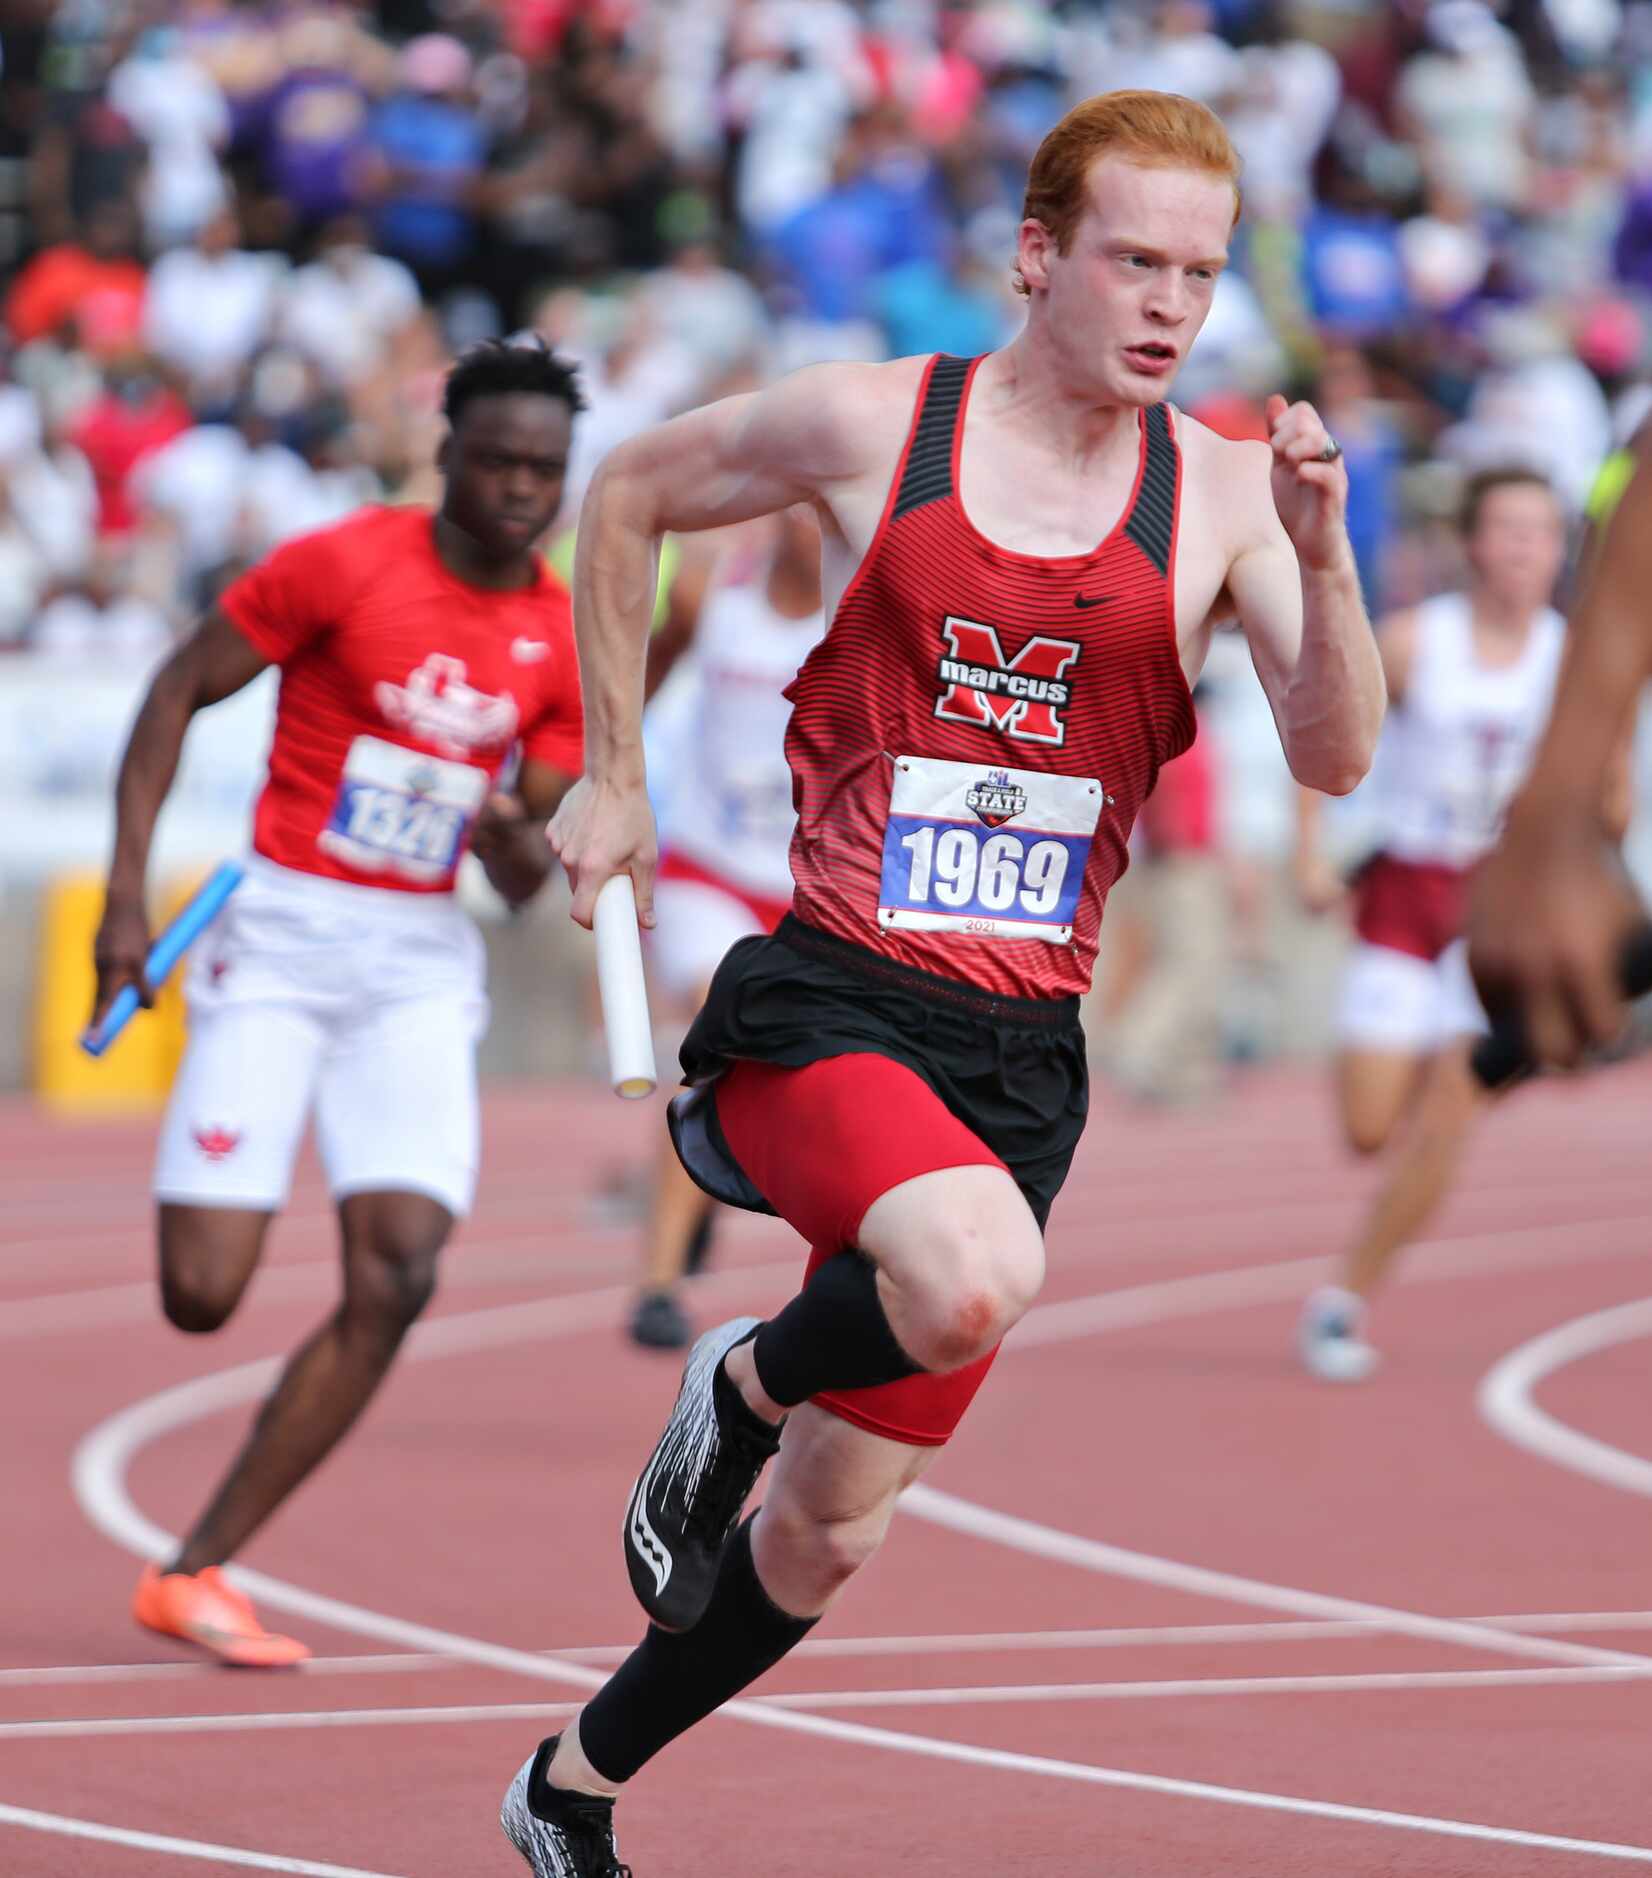 Ryan Dyess Coyle of Flower Mound Marcus competes in the 6A Boys 4x100 meter relay during the...